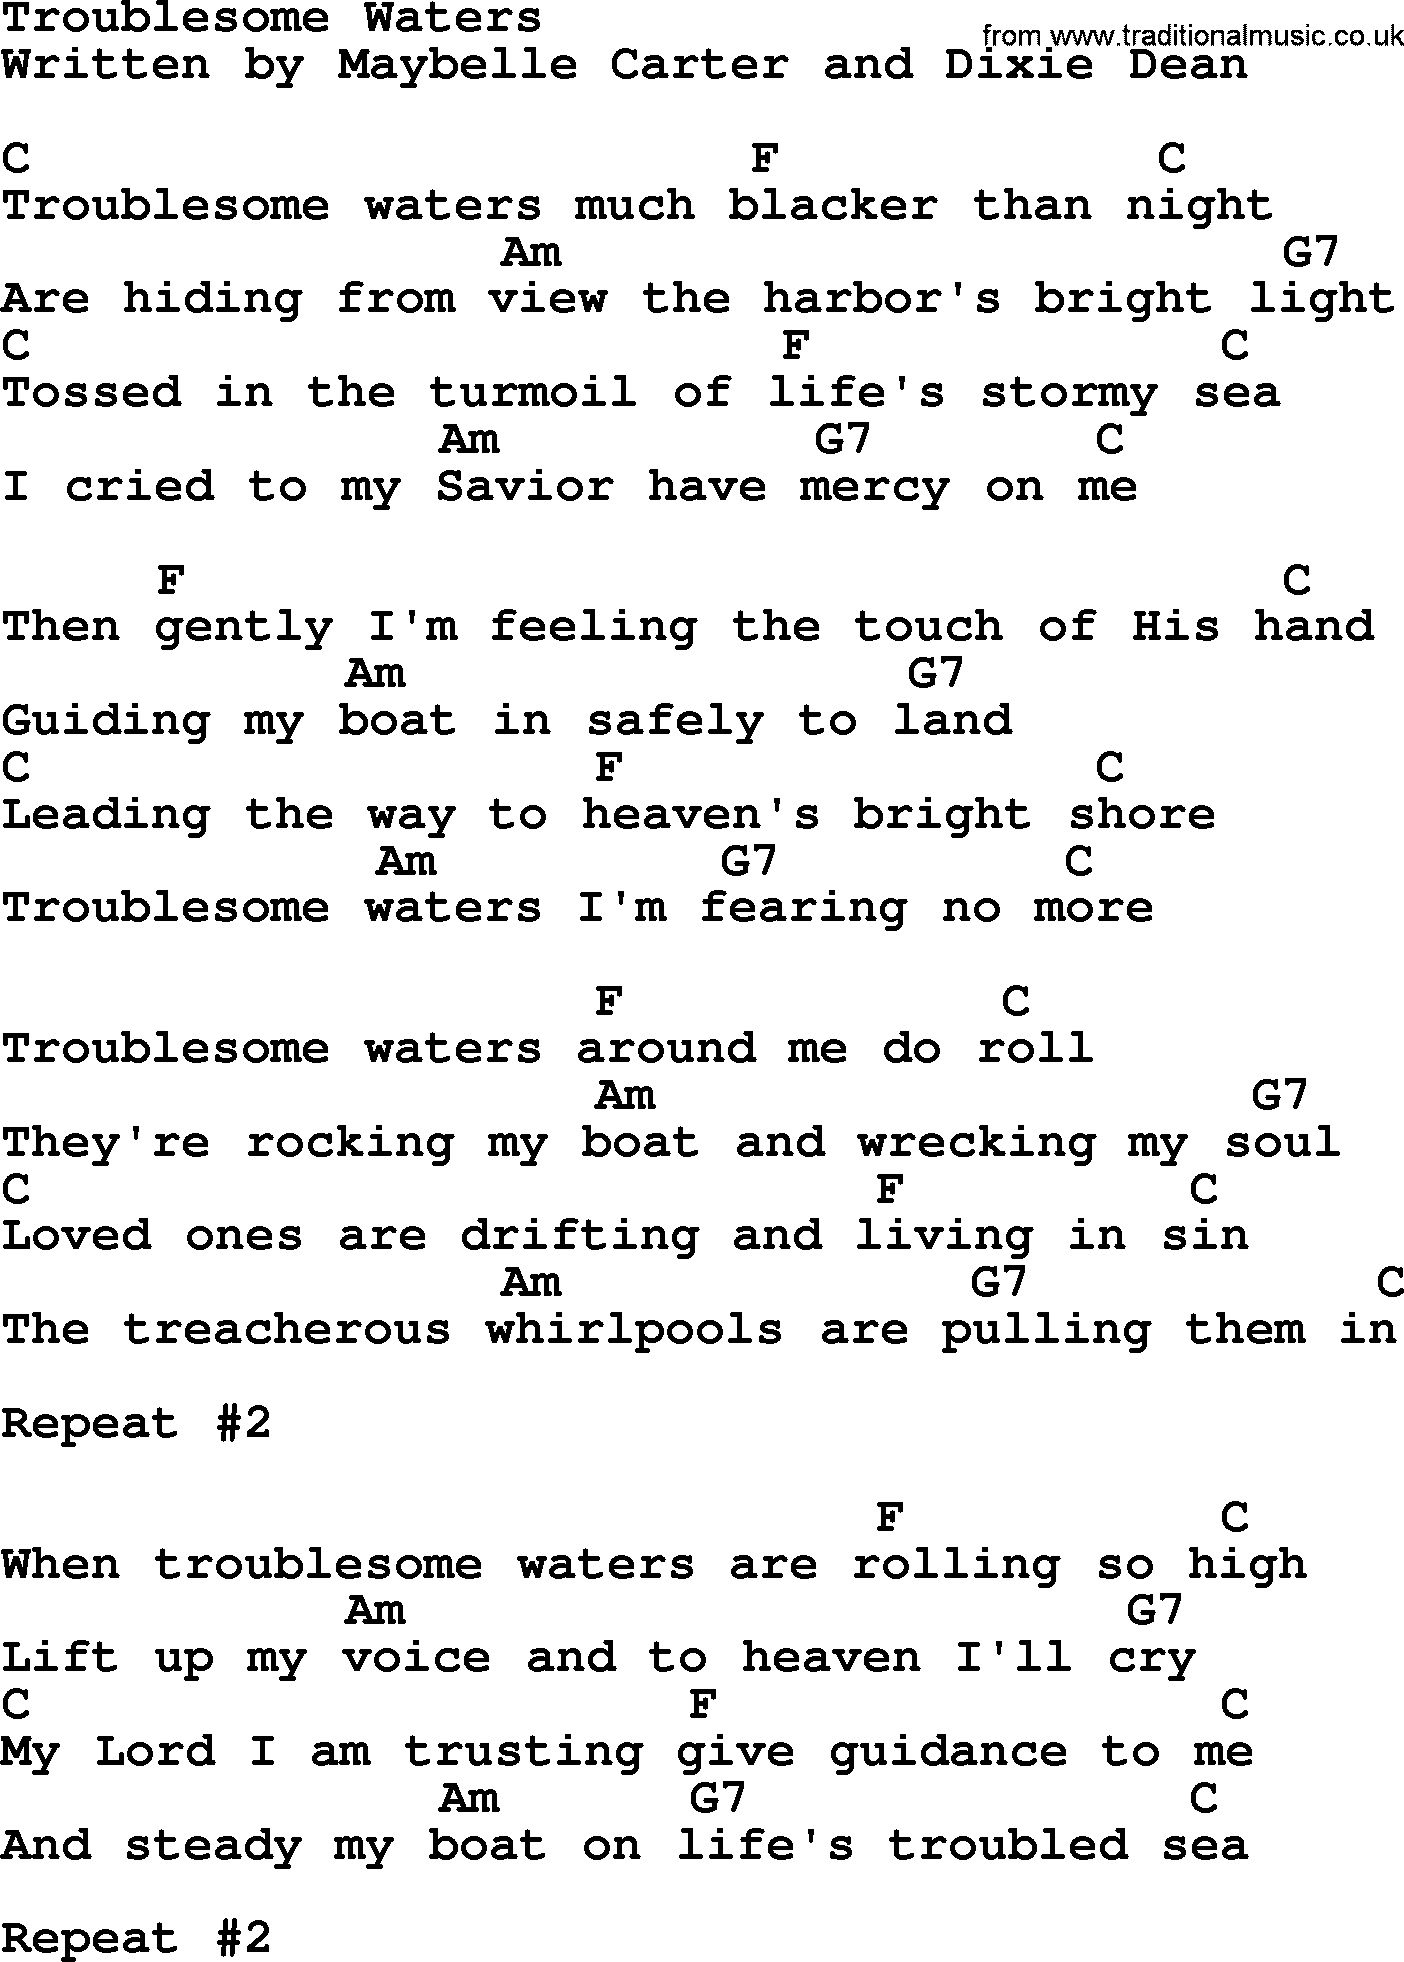 Johnny Cash song Troublesome Waters, lyrics and chords